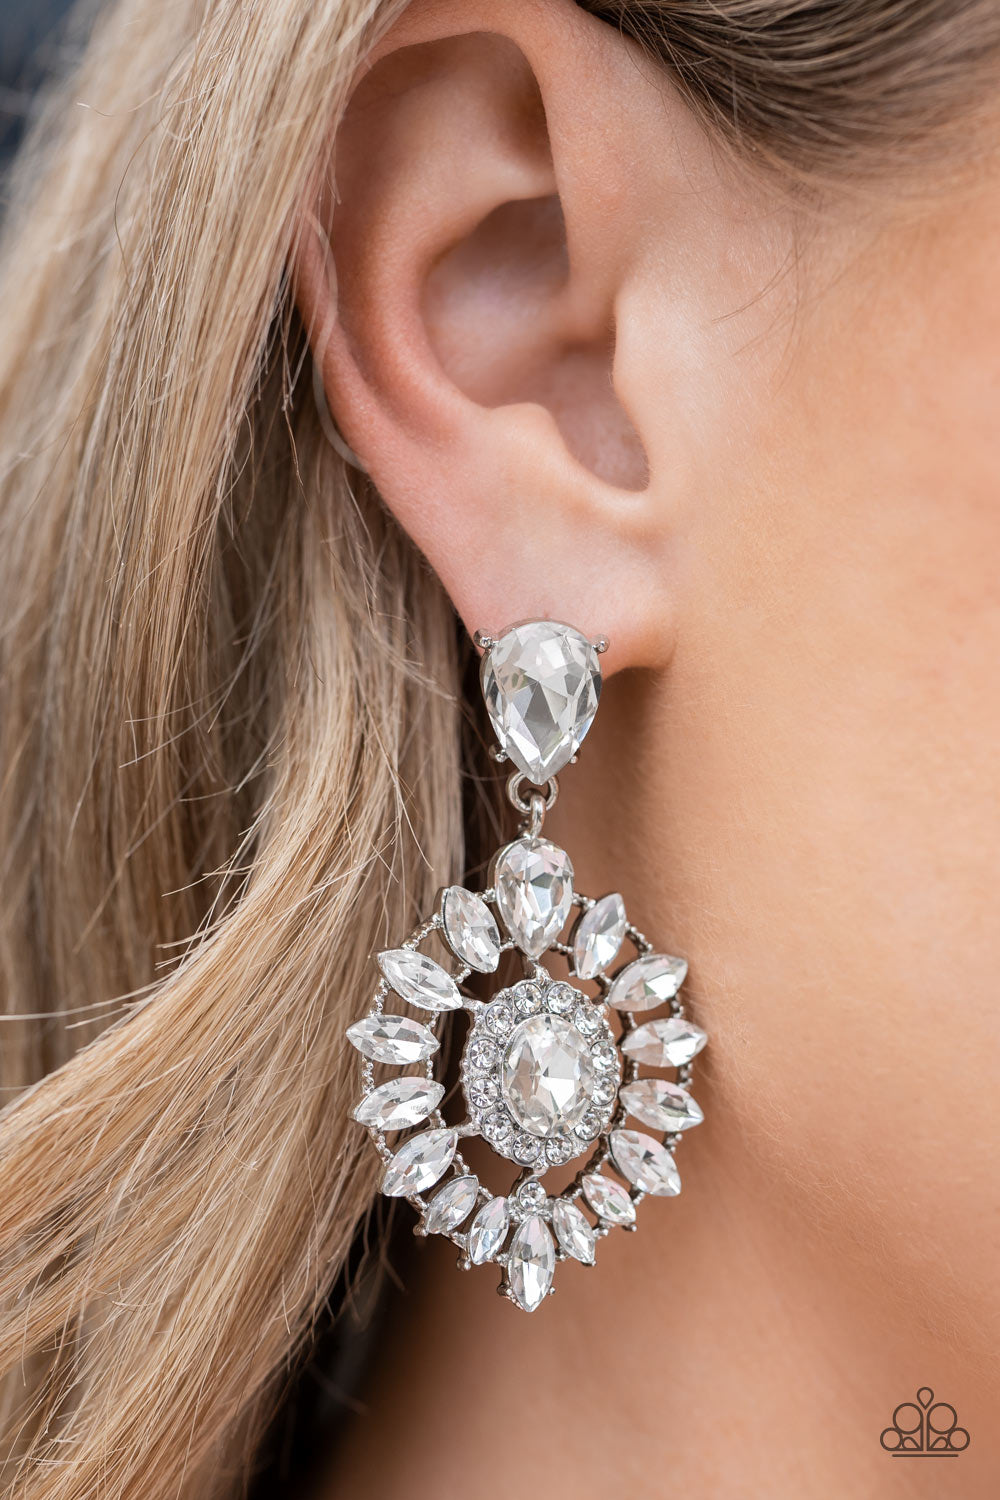 Paparazzi My Good LUXE Charm White Earrings